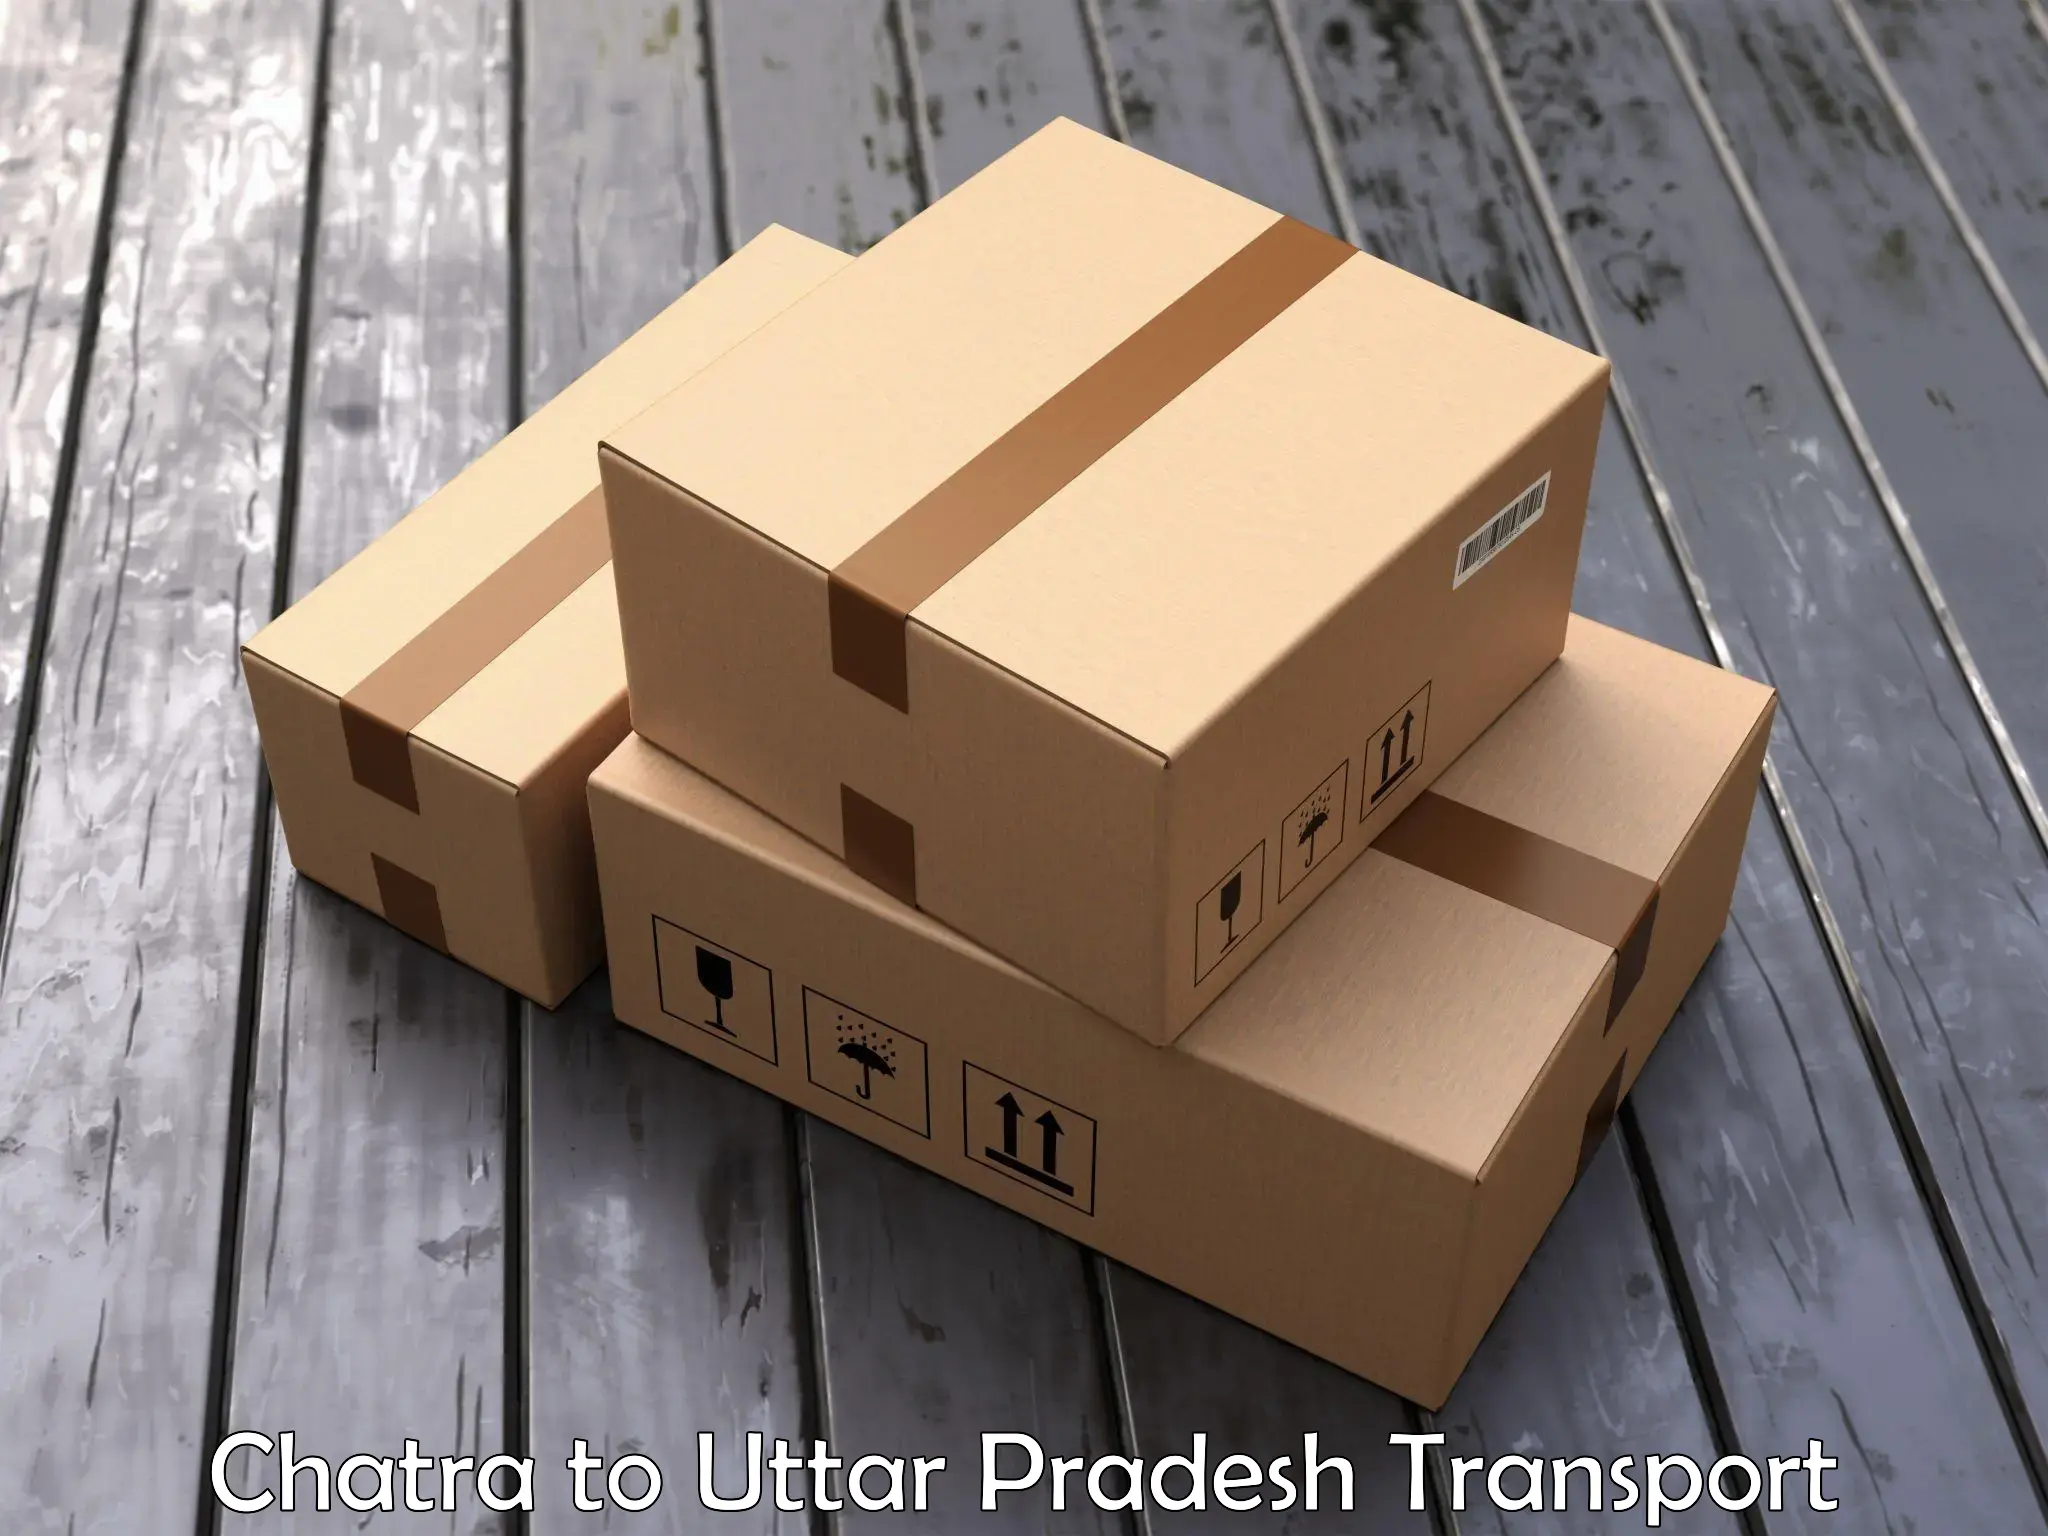 Parcel transport services Chatra to Sonbhadra